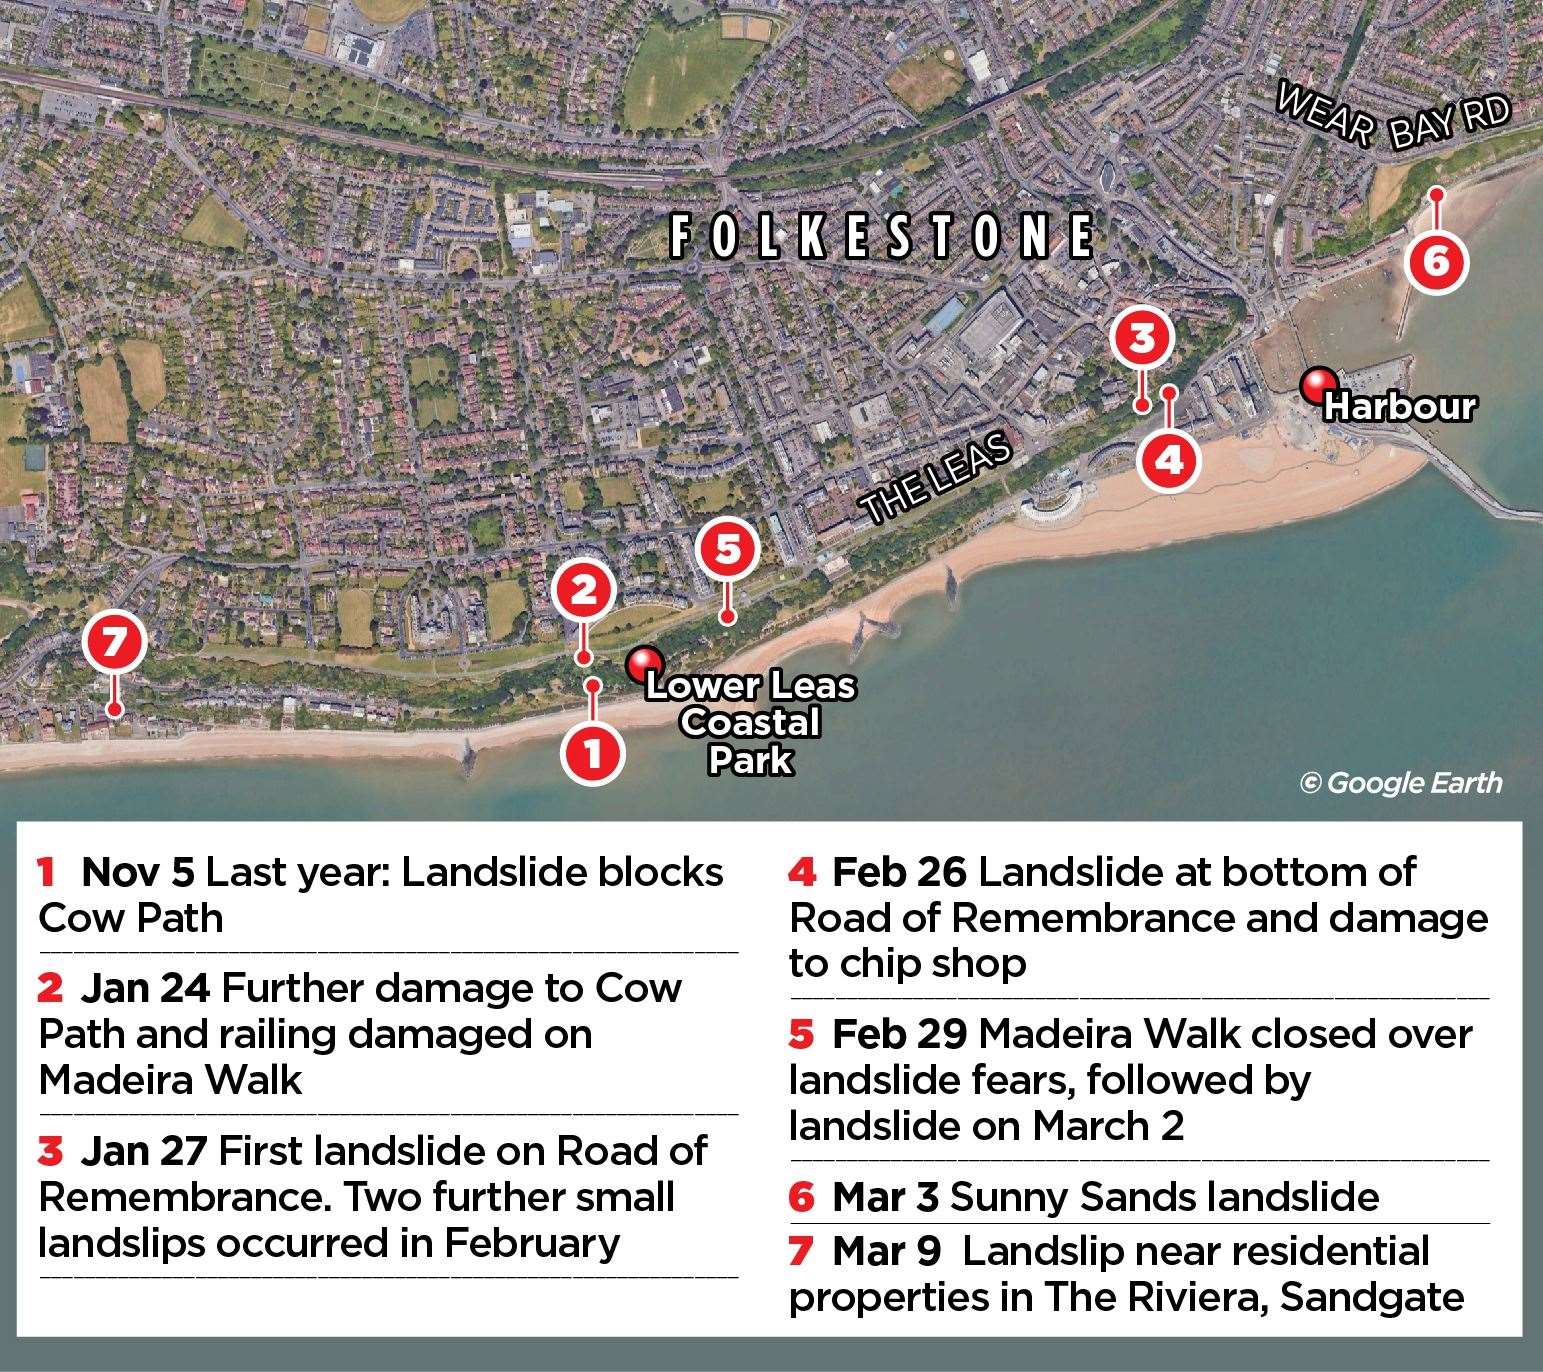 The landslides that have hit Folkestone over the past few months